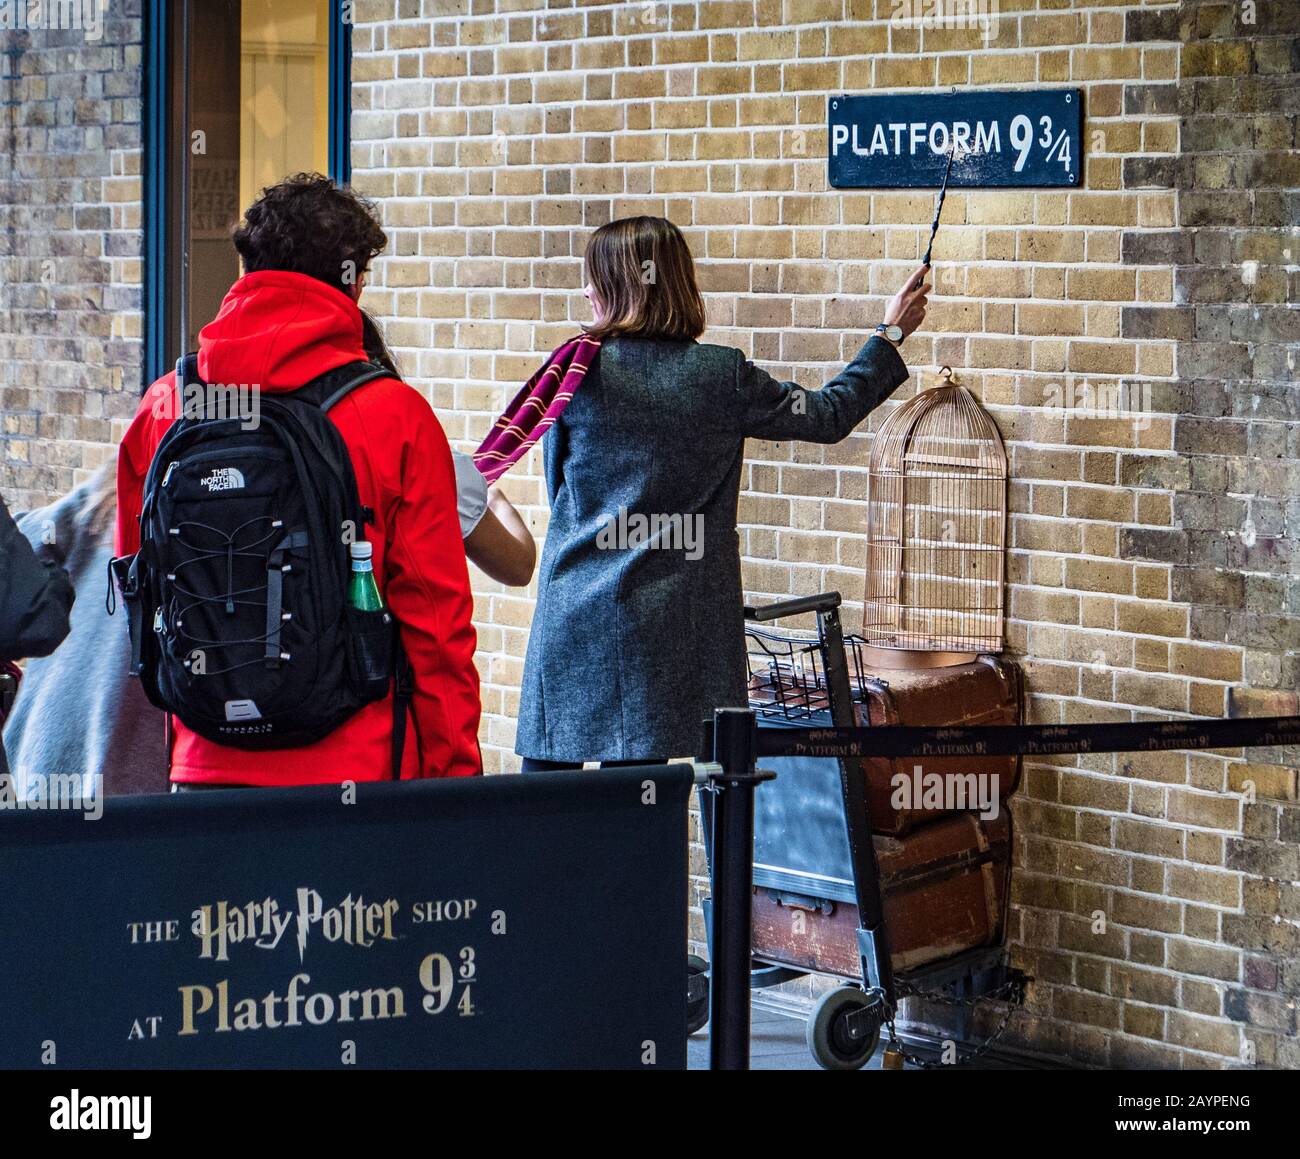 Harry Potter attractions for Platform 9 3/4 at Kings Cross Station London Stock Photo